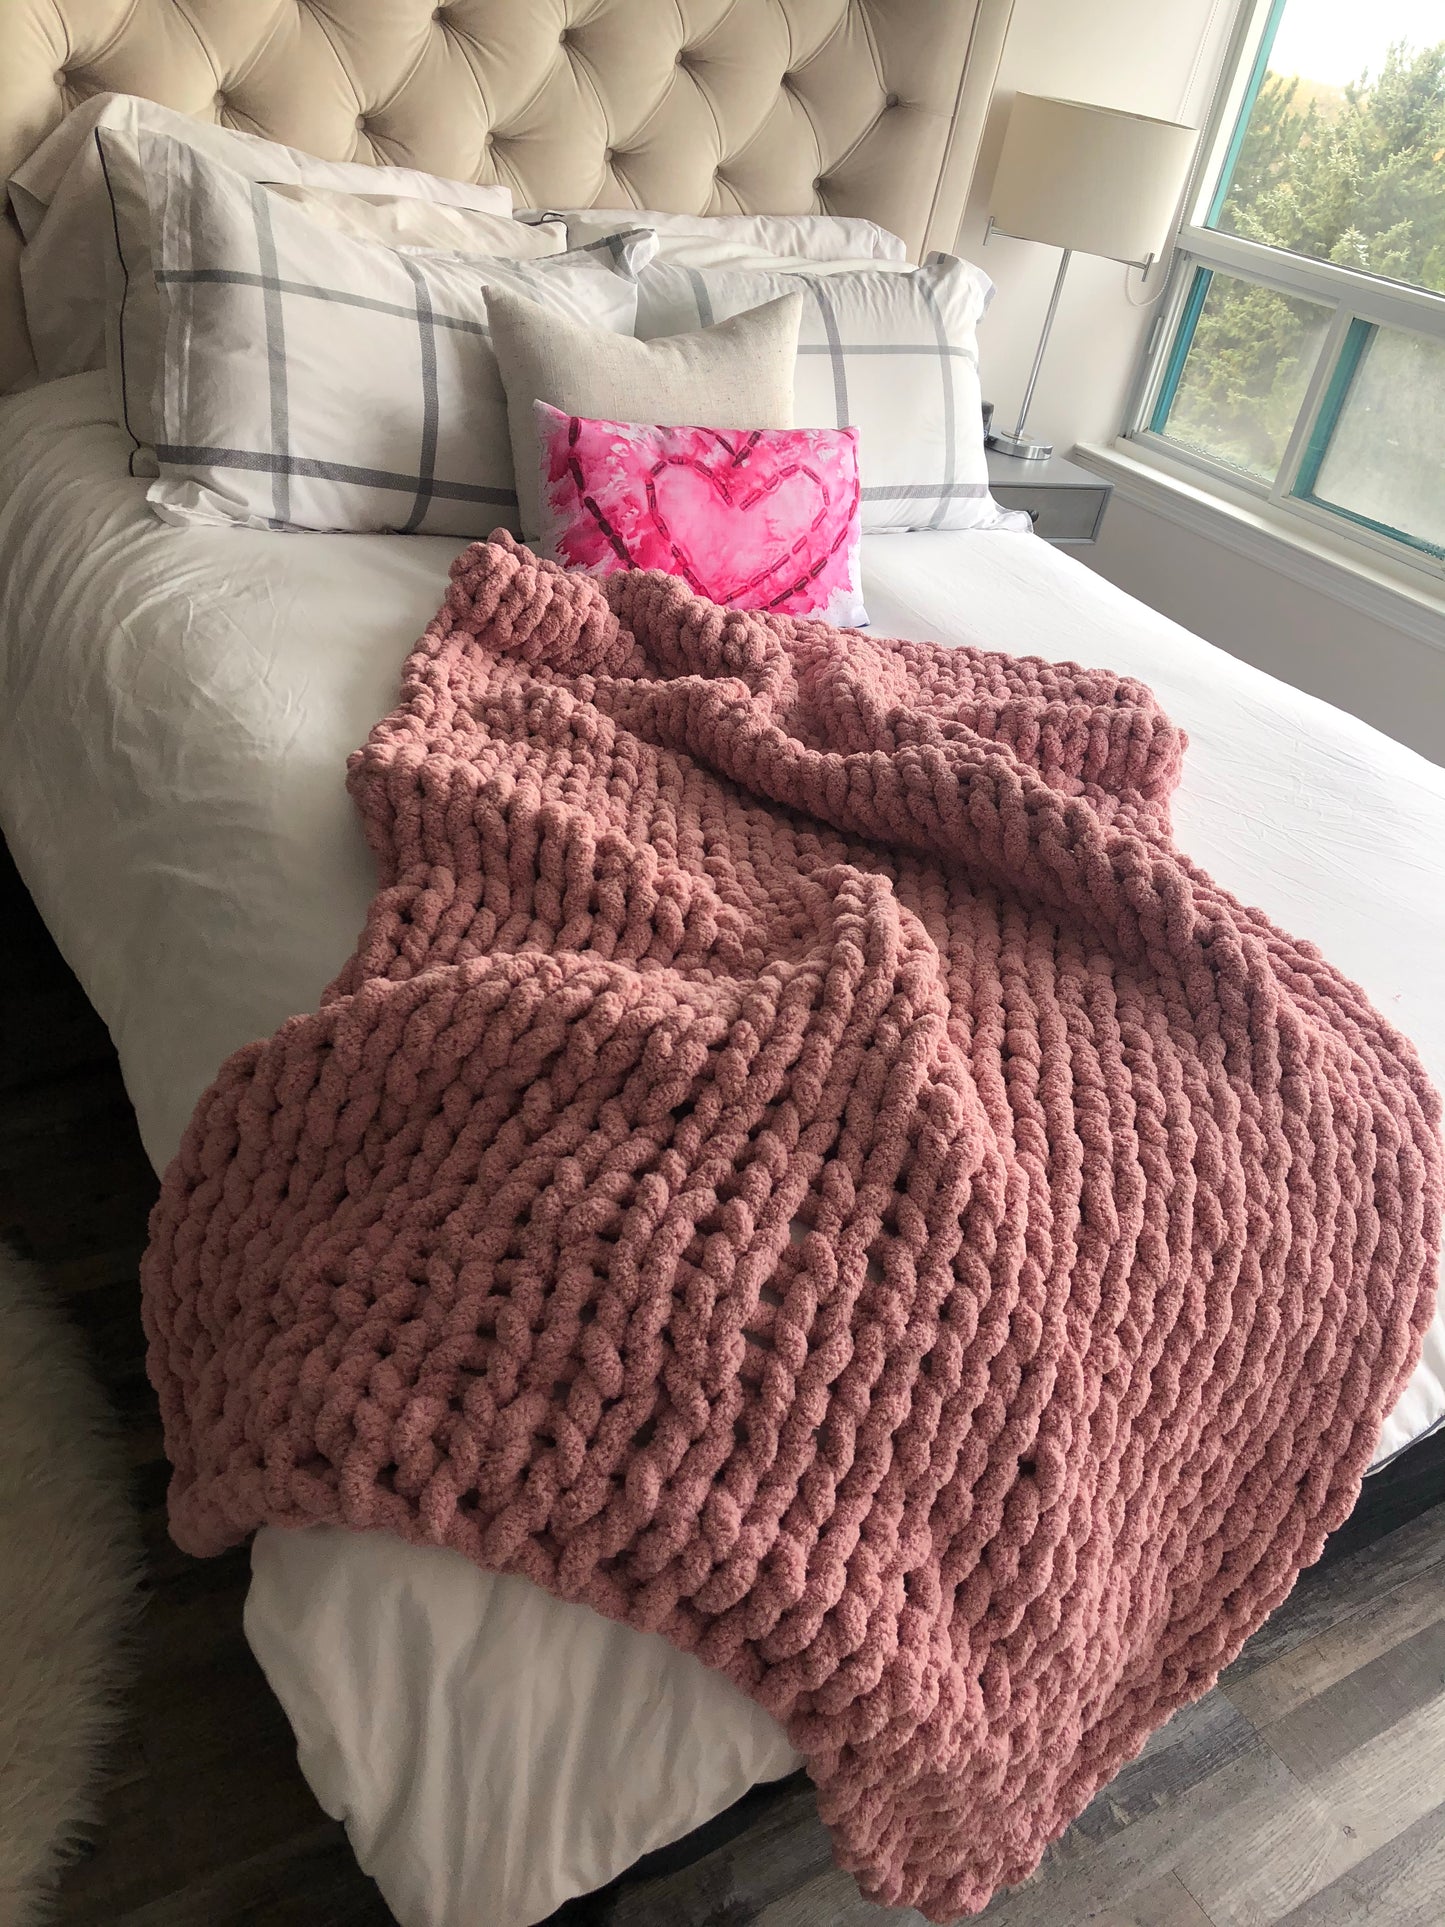 Healing Hand, Chunky Knit Blankets Pretty in Pink